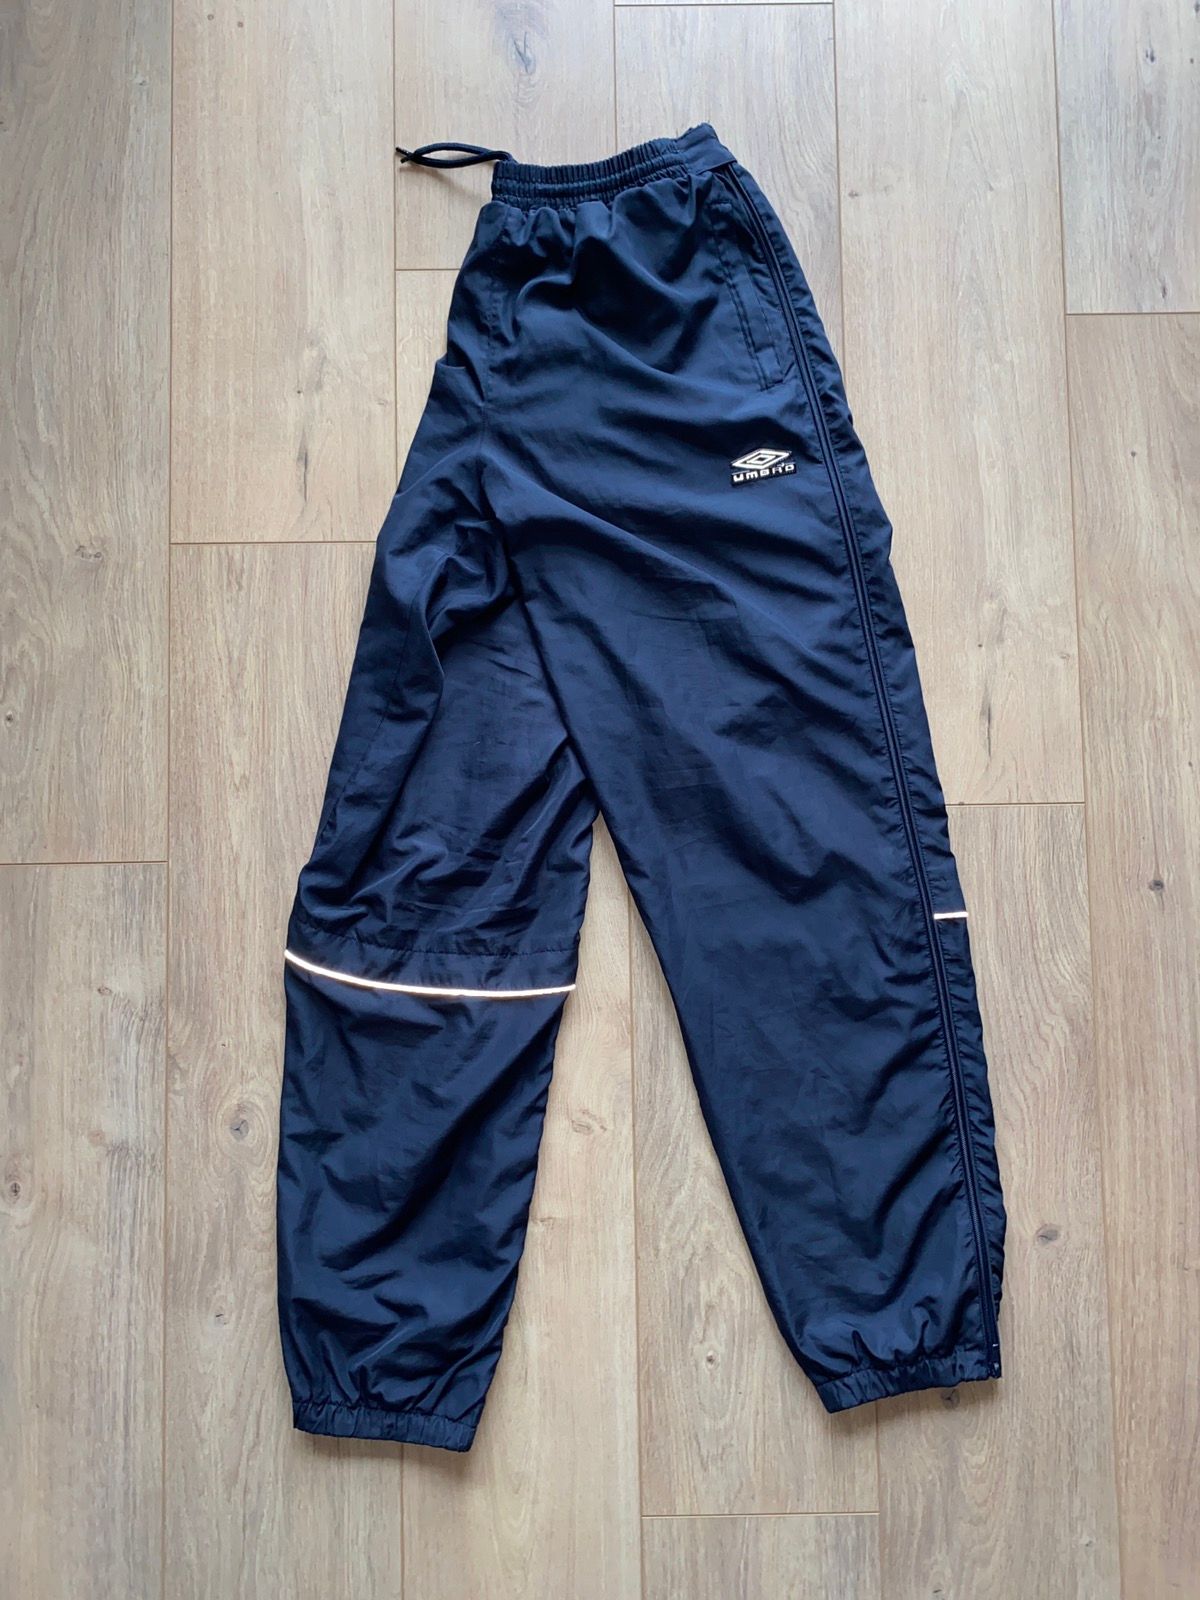 Pre-owned Umbro X Vintage Umbro Track Pants 3m Reflective Vintage Sweatpants Joggers In Navy